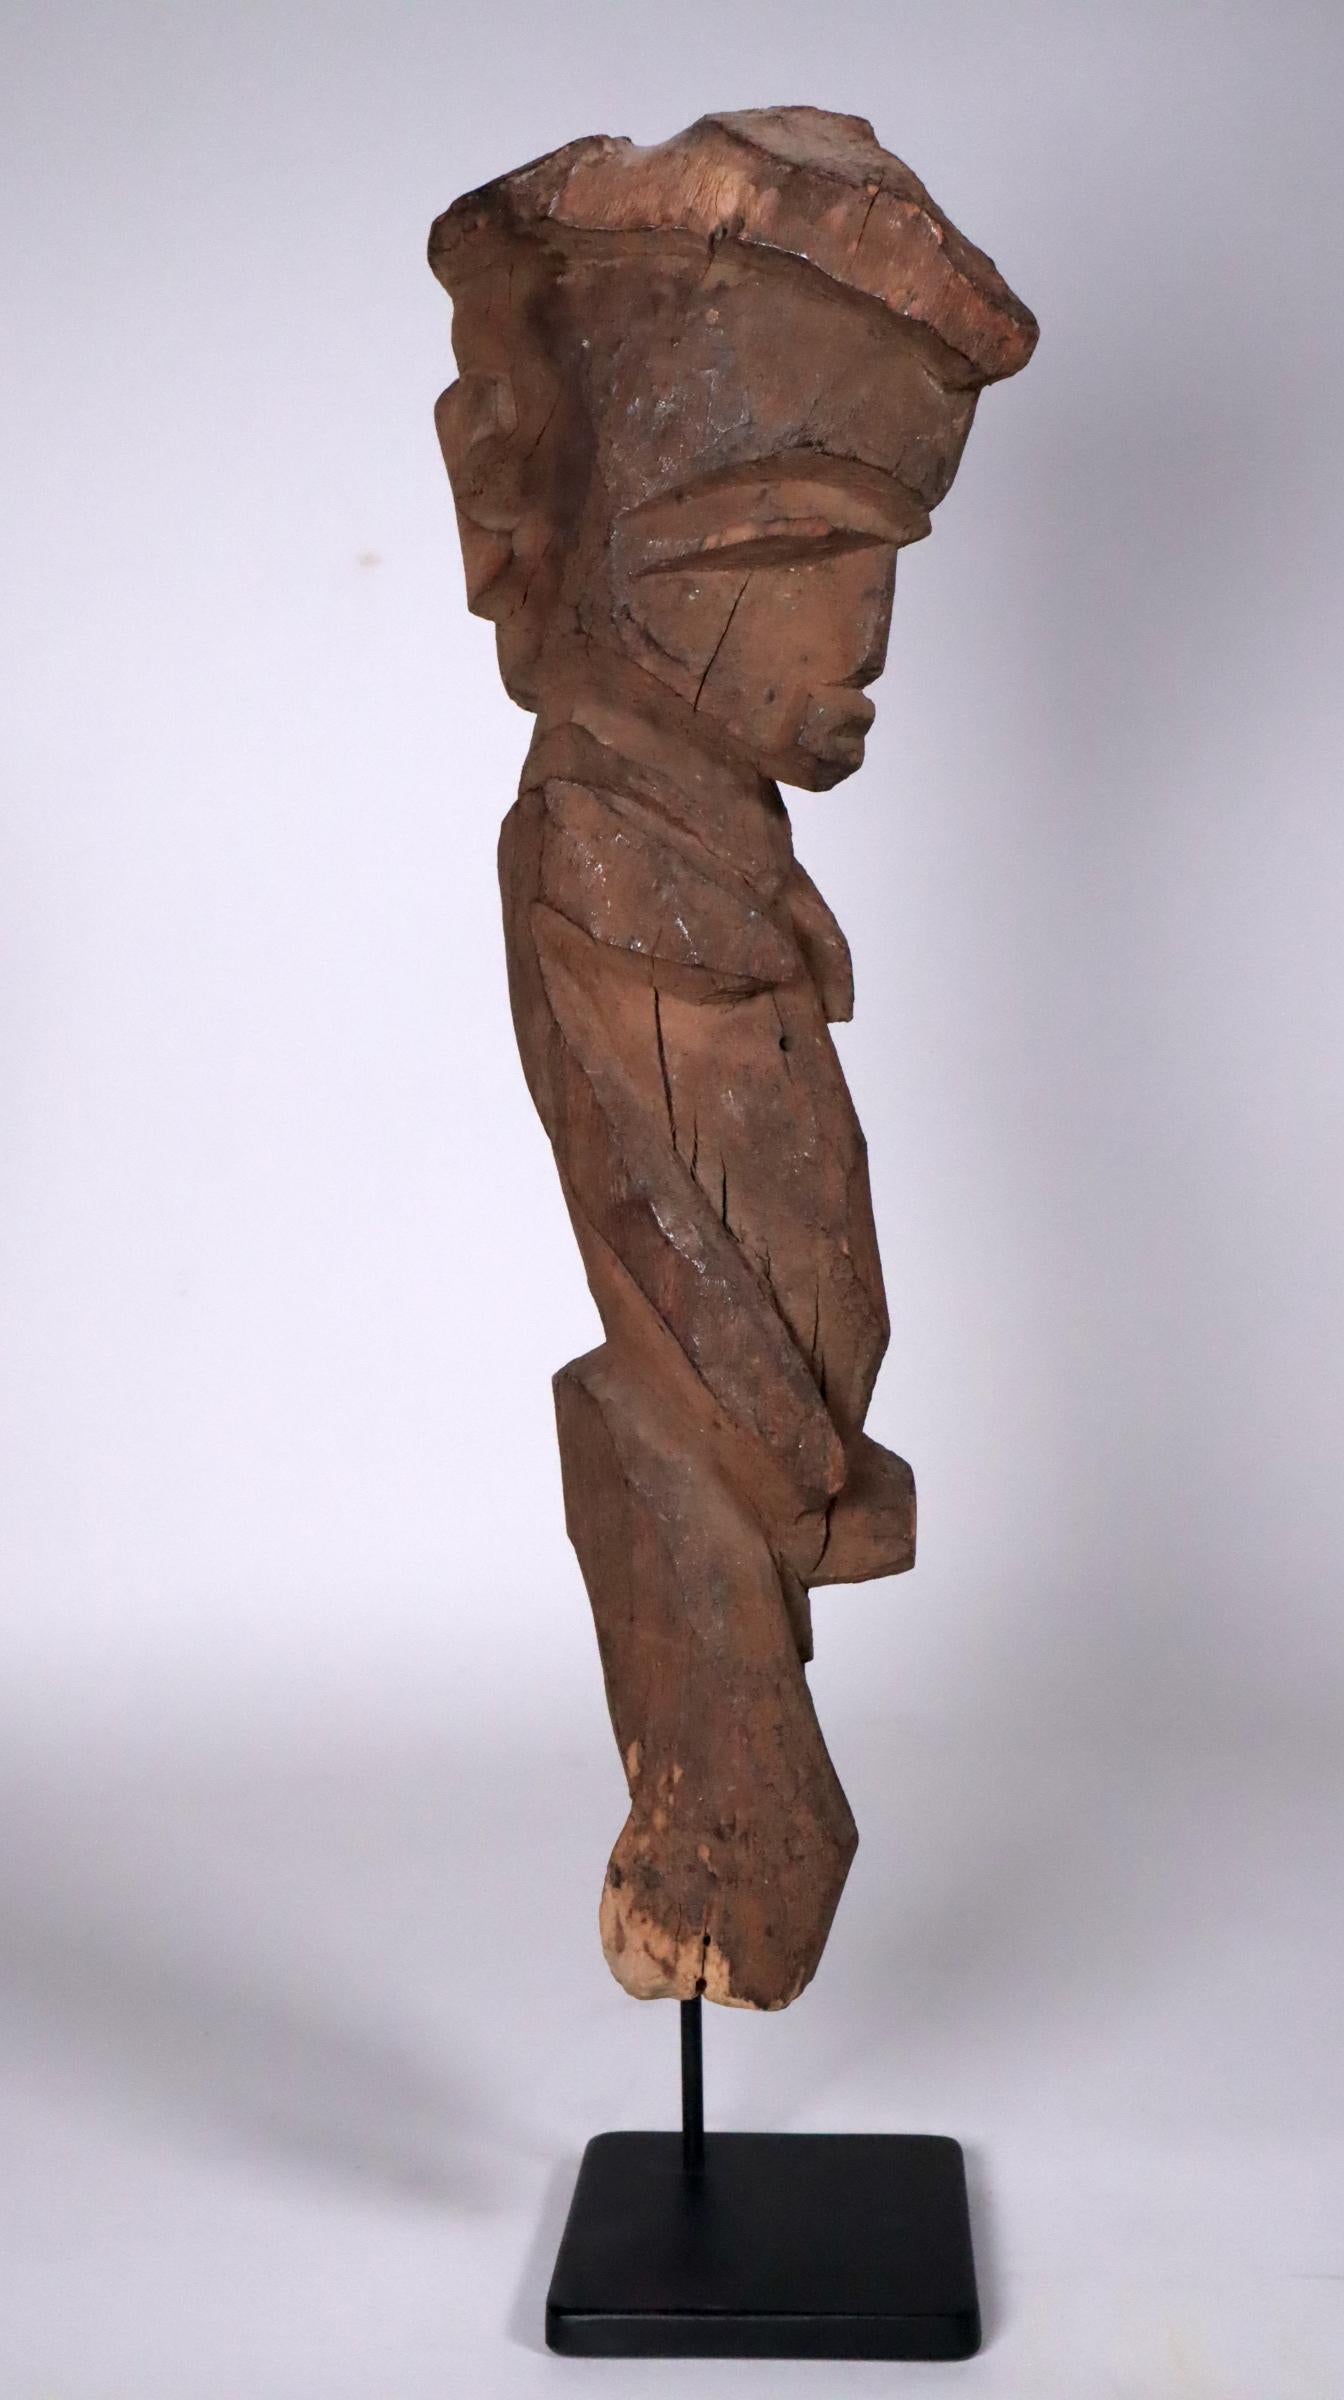 Very cubist style Lobi carving composed of sharp angles and planes in an harmonious visual rhythm. The Lobi span a region of north Ghana, Burkina Faso, and a small part of the Ivory Coast. Figures such as this are carved for ancestral shrines or